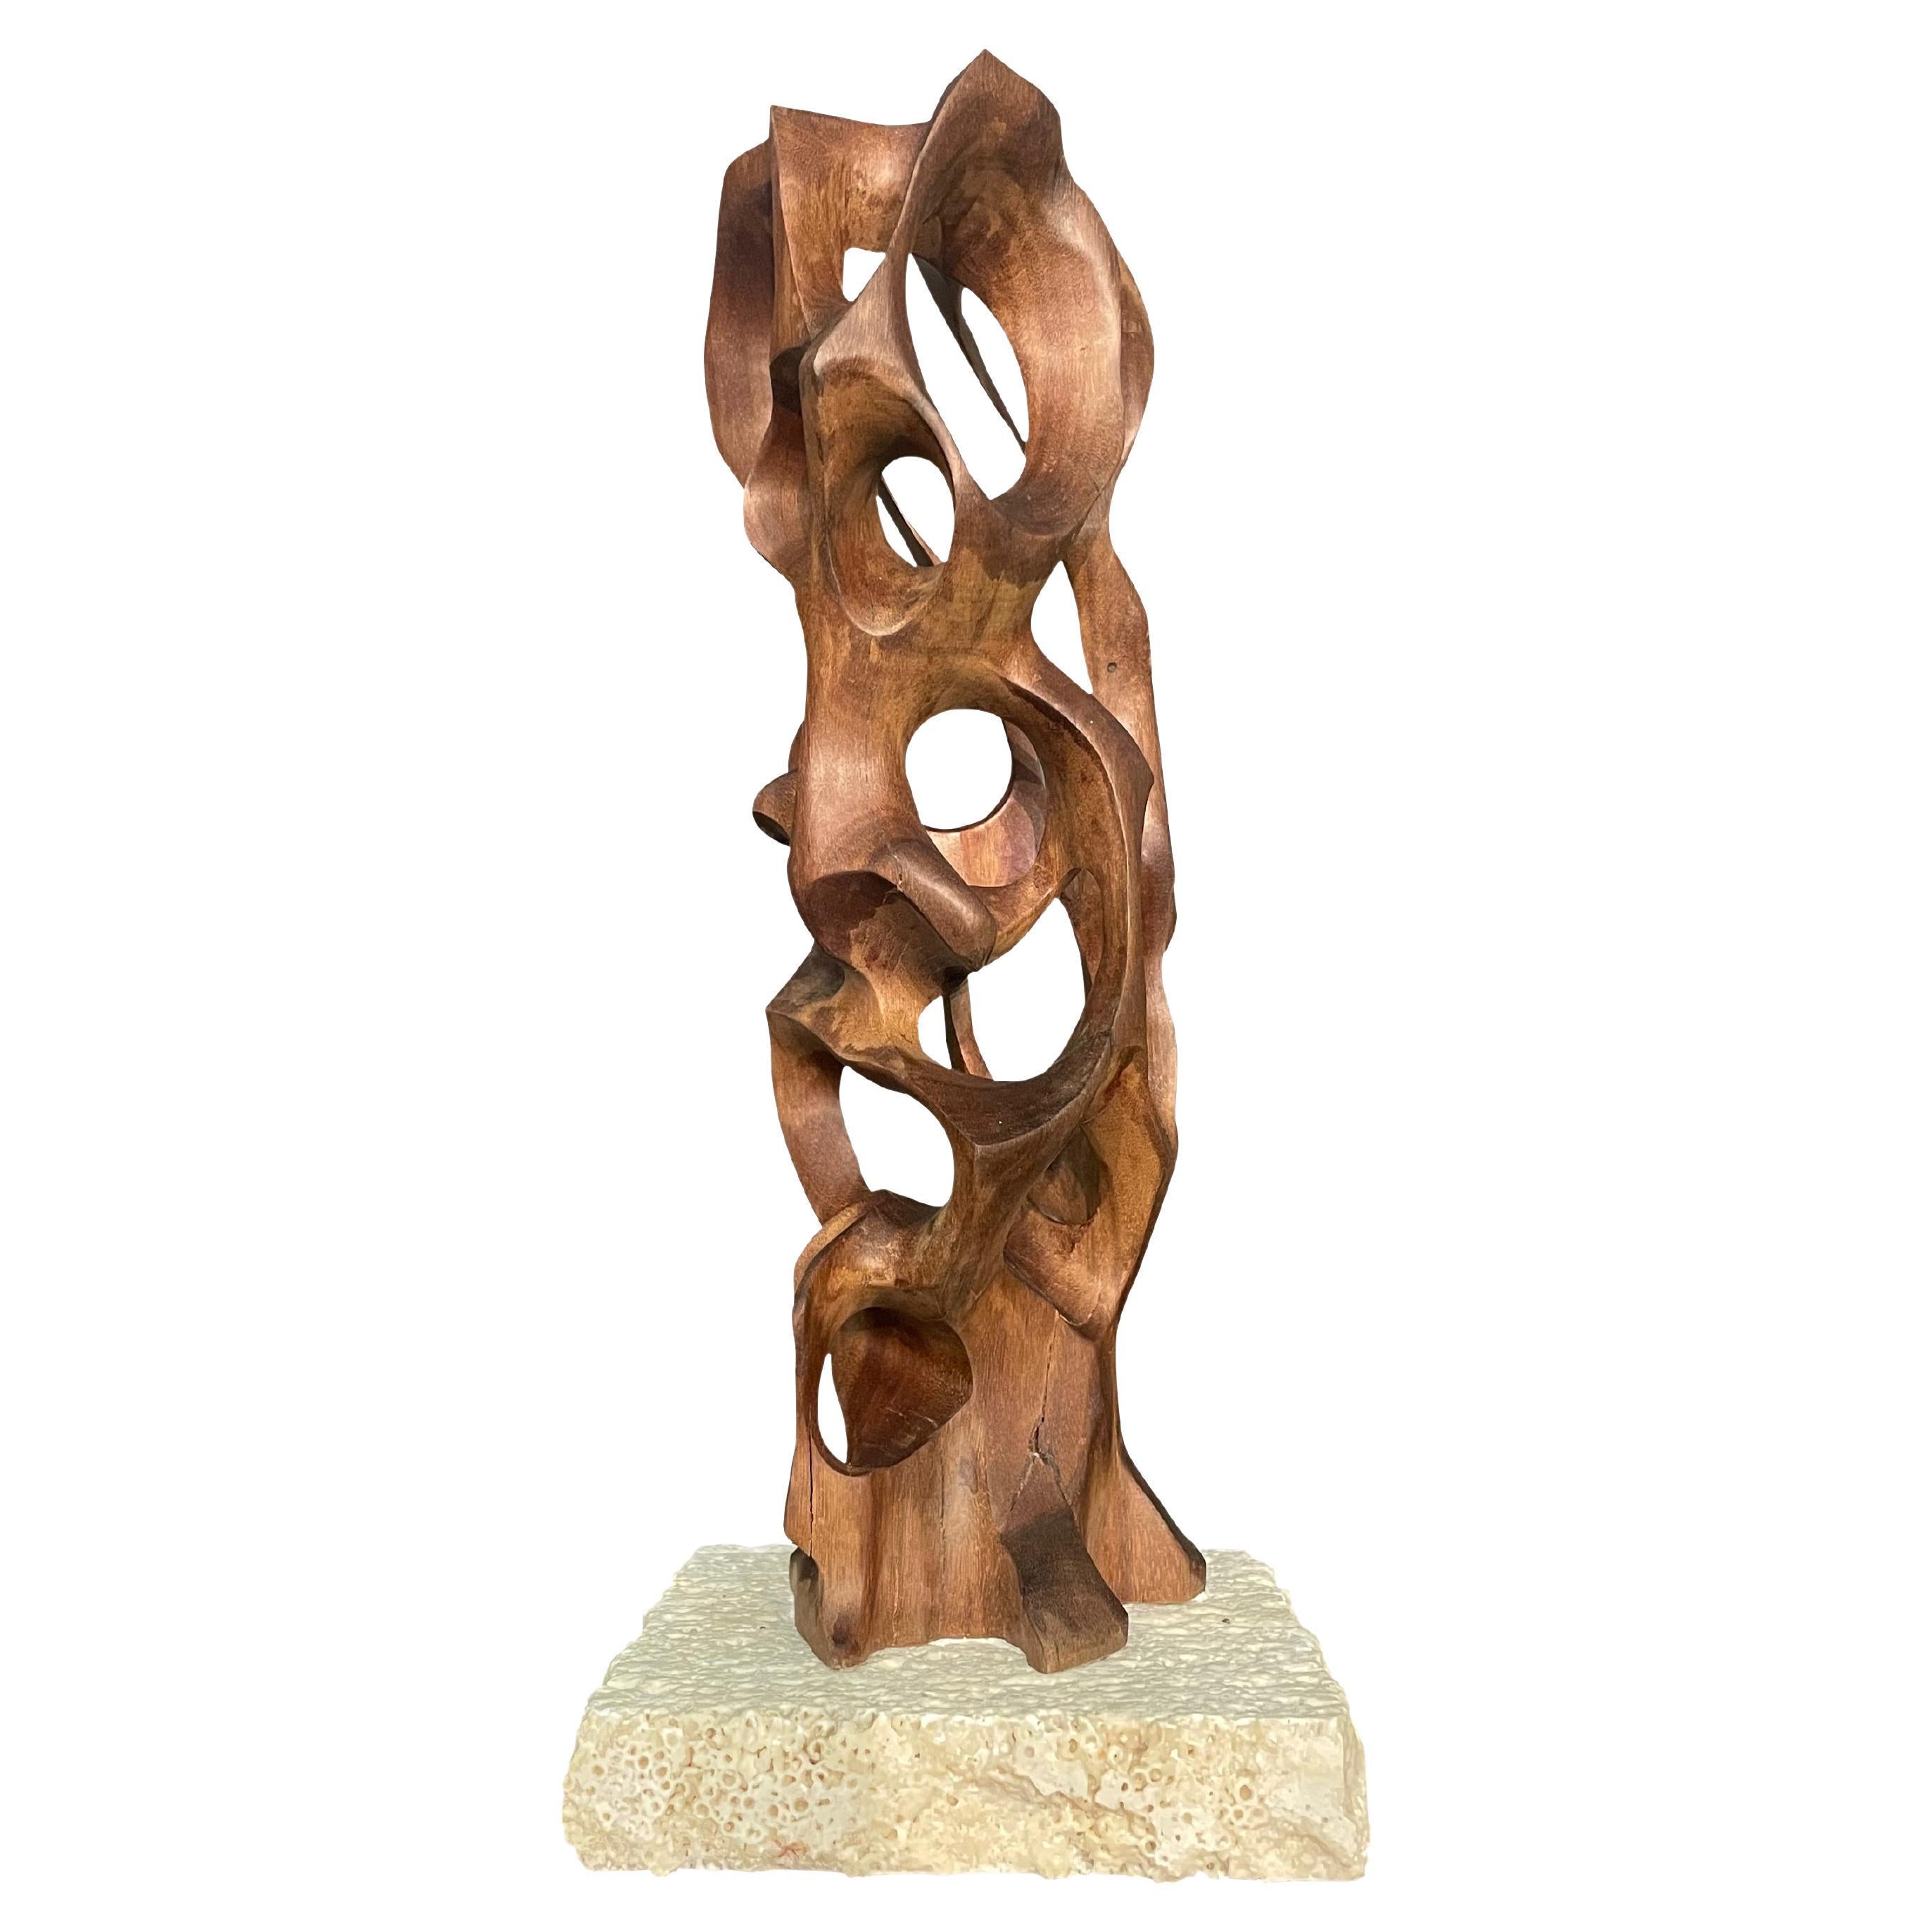 Hand Carved Wood Sculpture On Travertine Base, Italy, Contemporary